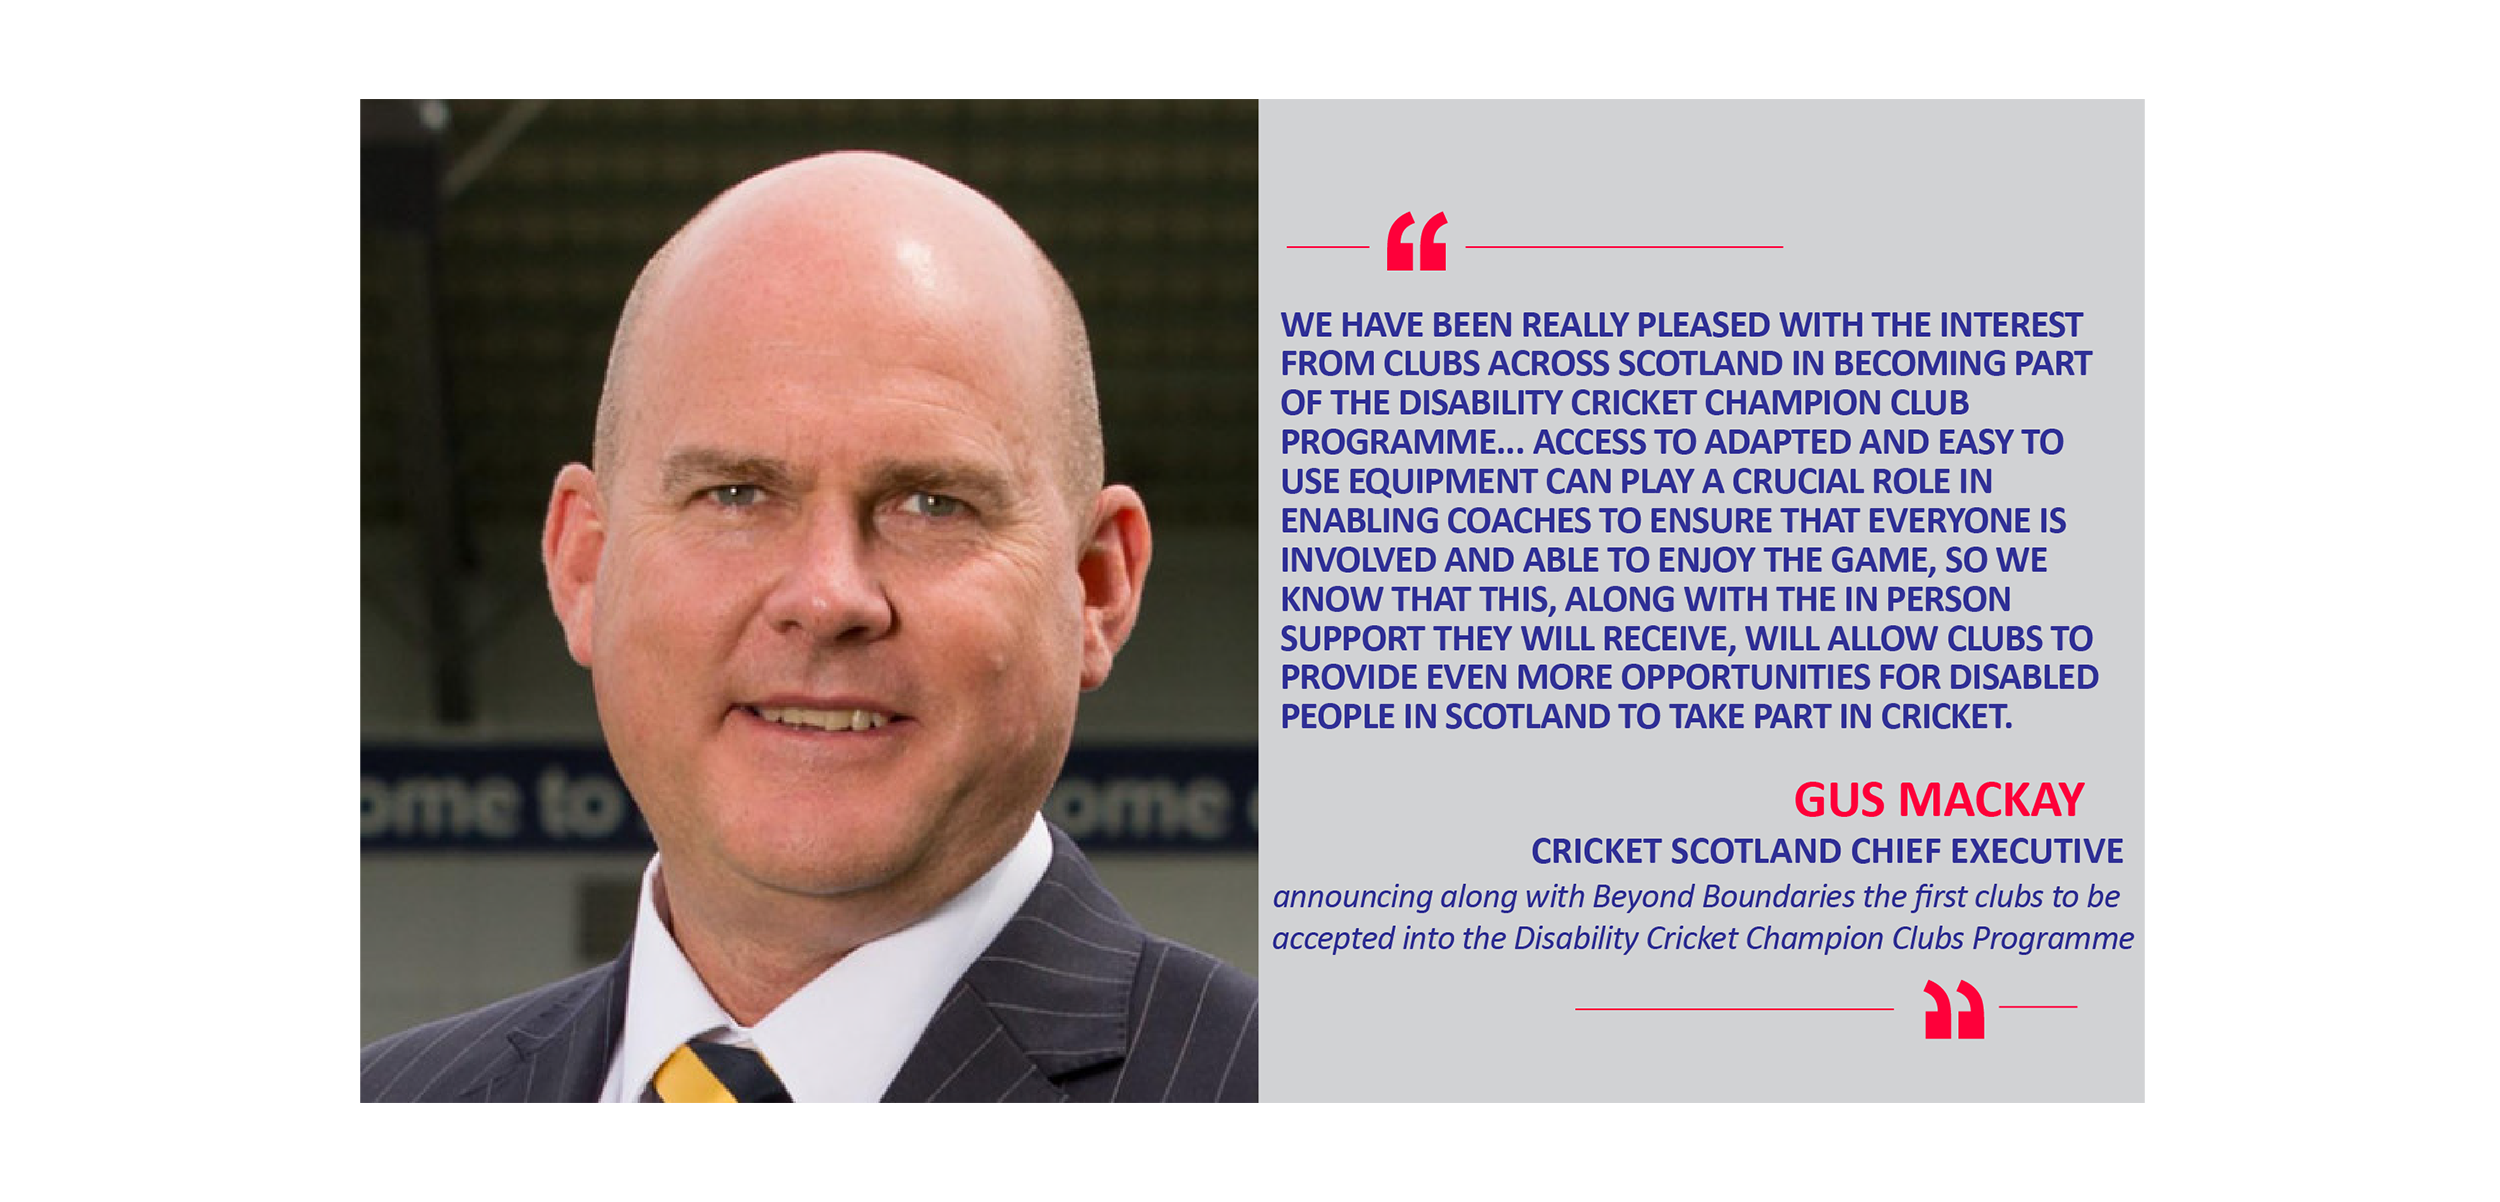 Gus Mackay, Cricket Scotland Chief Executive announcing along with Beyond Boundaries the first clubs to be accepted into the Disability Cricket Champion Clubs Programme